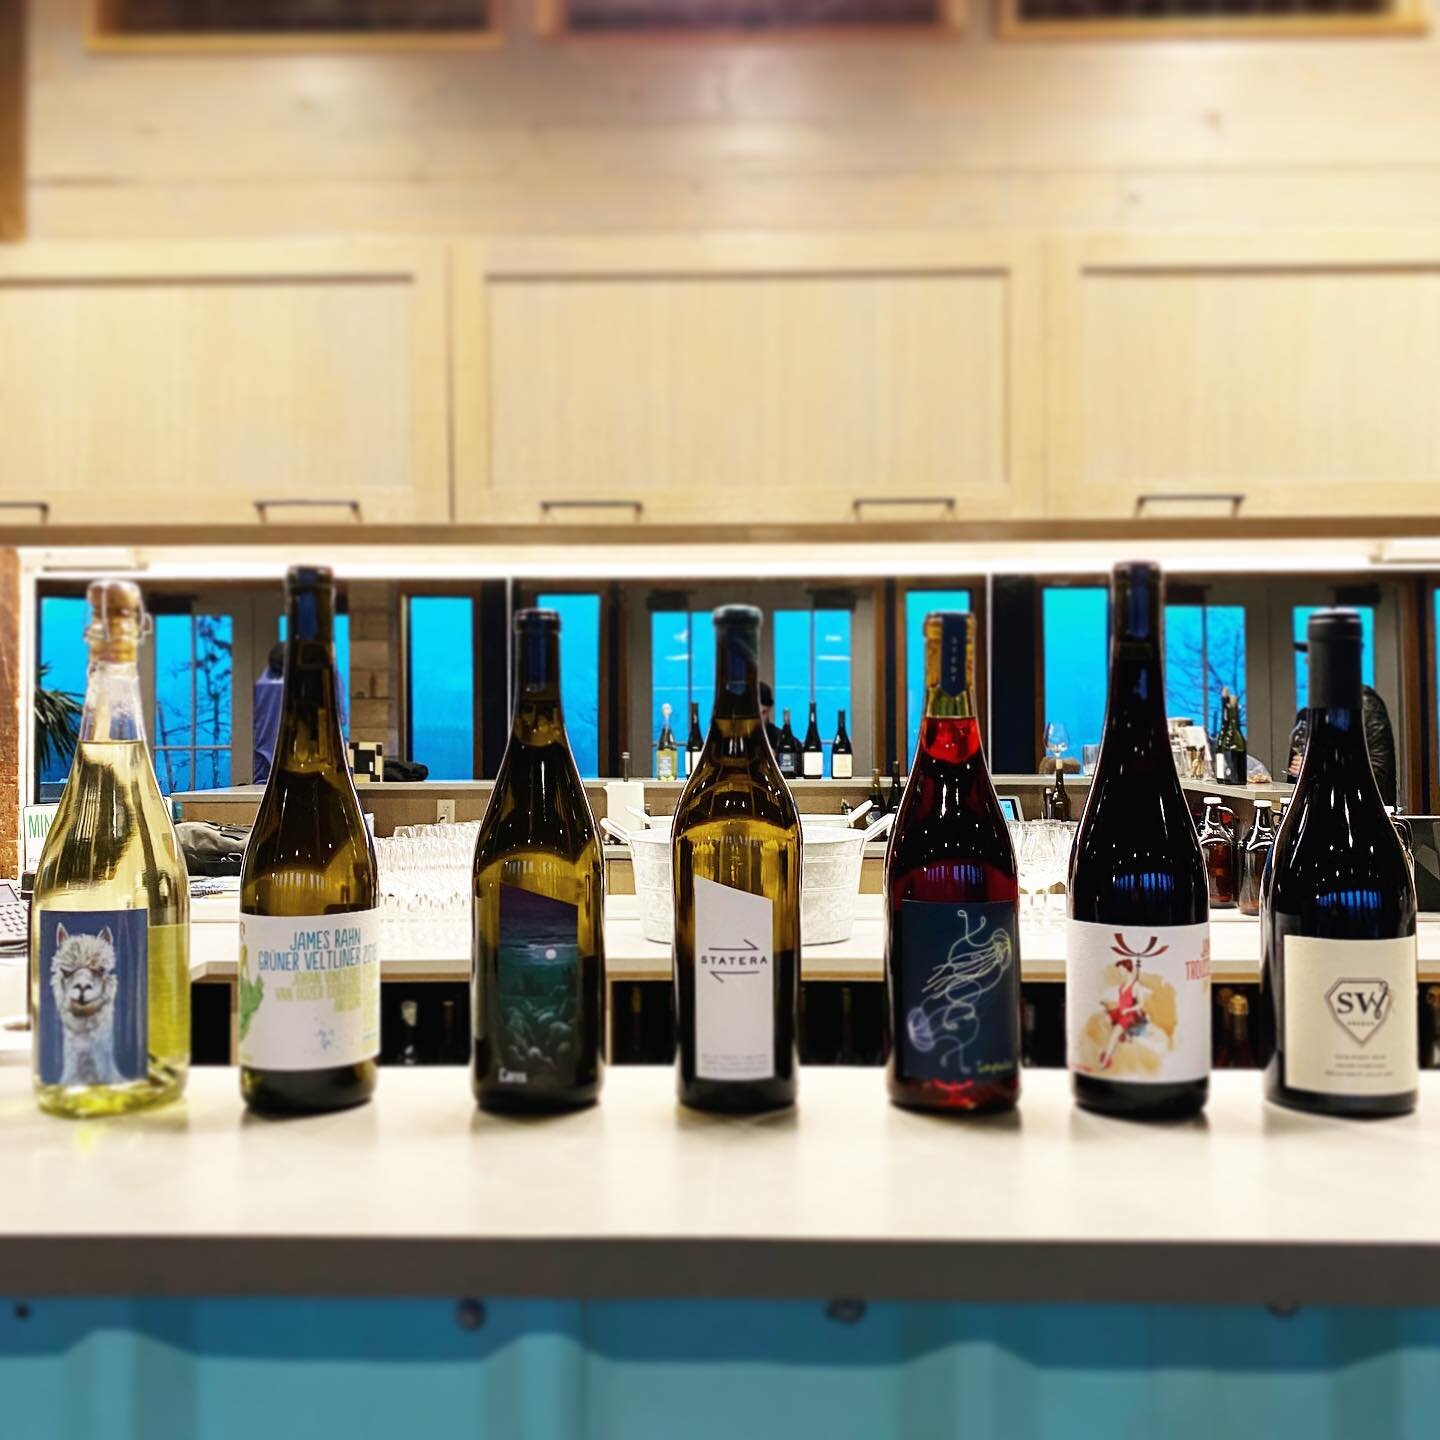 This line up in our tasting room at @abbeyroadfarm right now is bonkers: ARF &lsquo;18 Demi-Sec Sparkling Pinot Gris, &lsquo;18 @lareswines Aligot&eacute;, &lsquo;16 @stateracellars @bellepente #chardonnay , &lsquo;17 @stedtwines #gamay , &lsquo;18 @